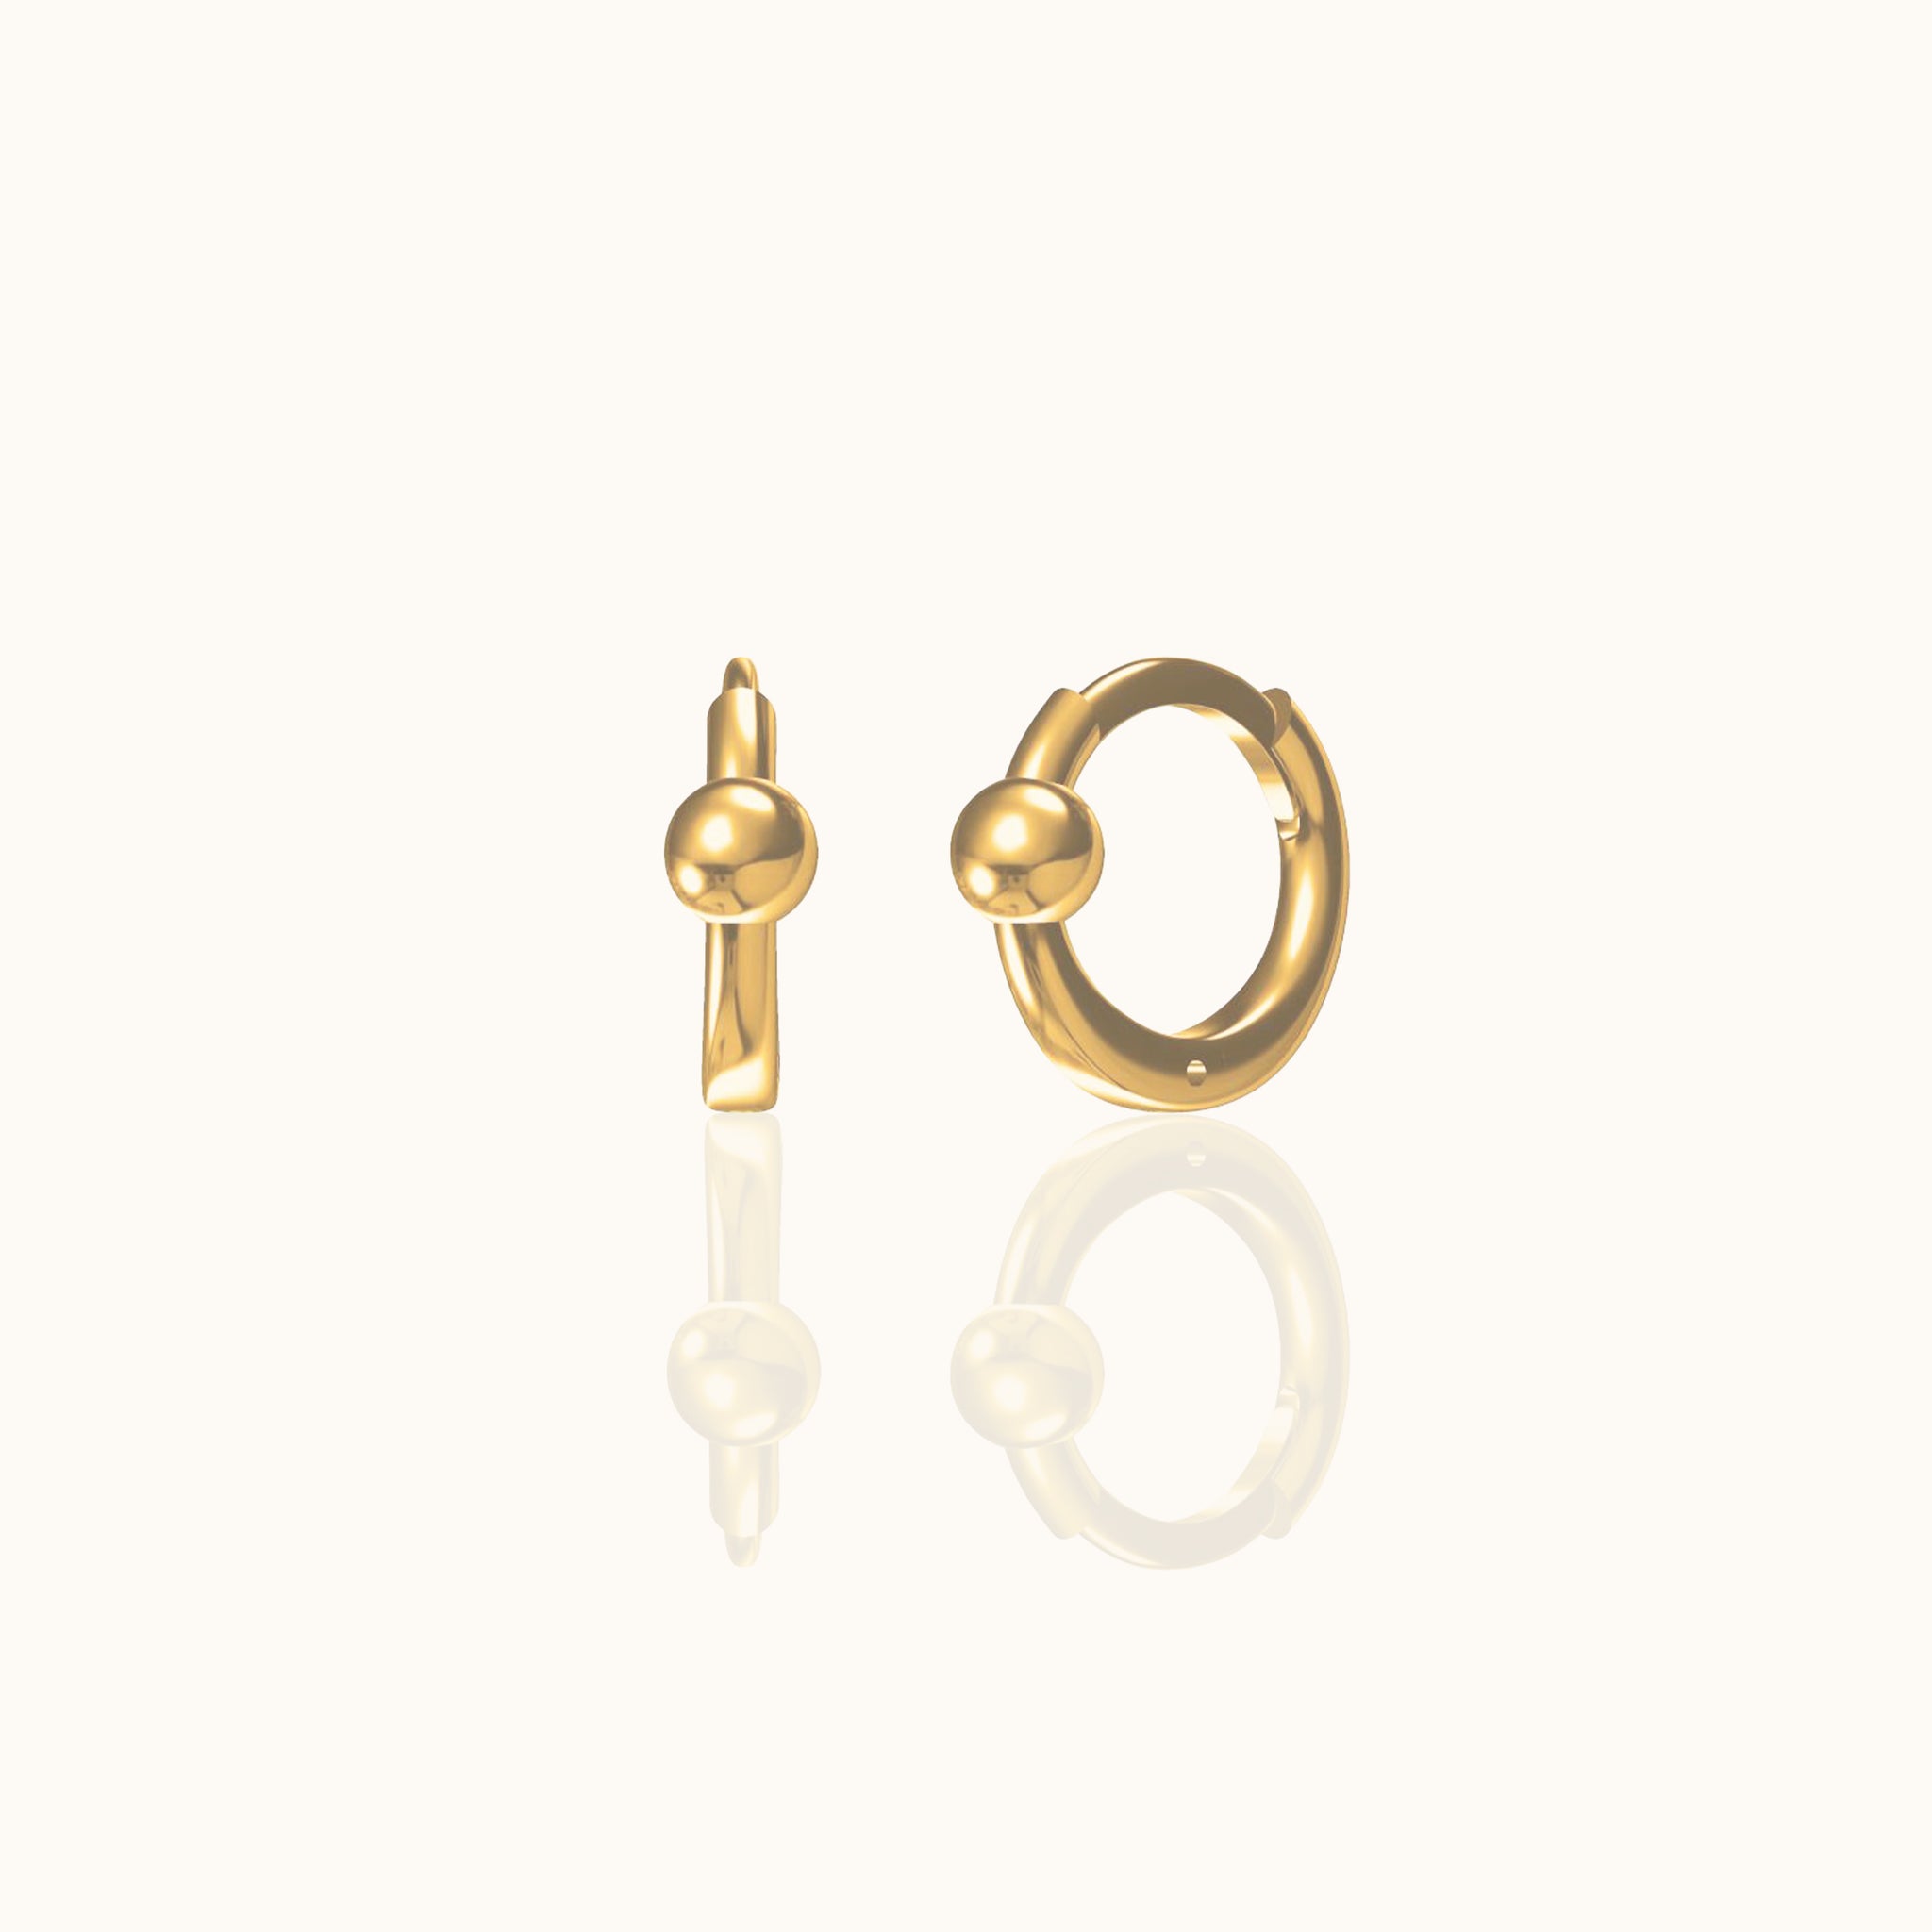 Petite Tragus Cartilage Tiny Huggie Gold Dainty Ring Hoop Earrings by Doviana